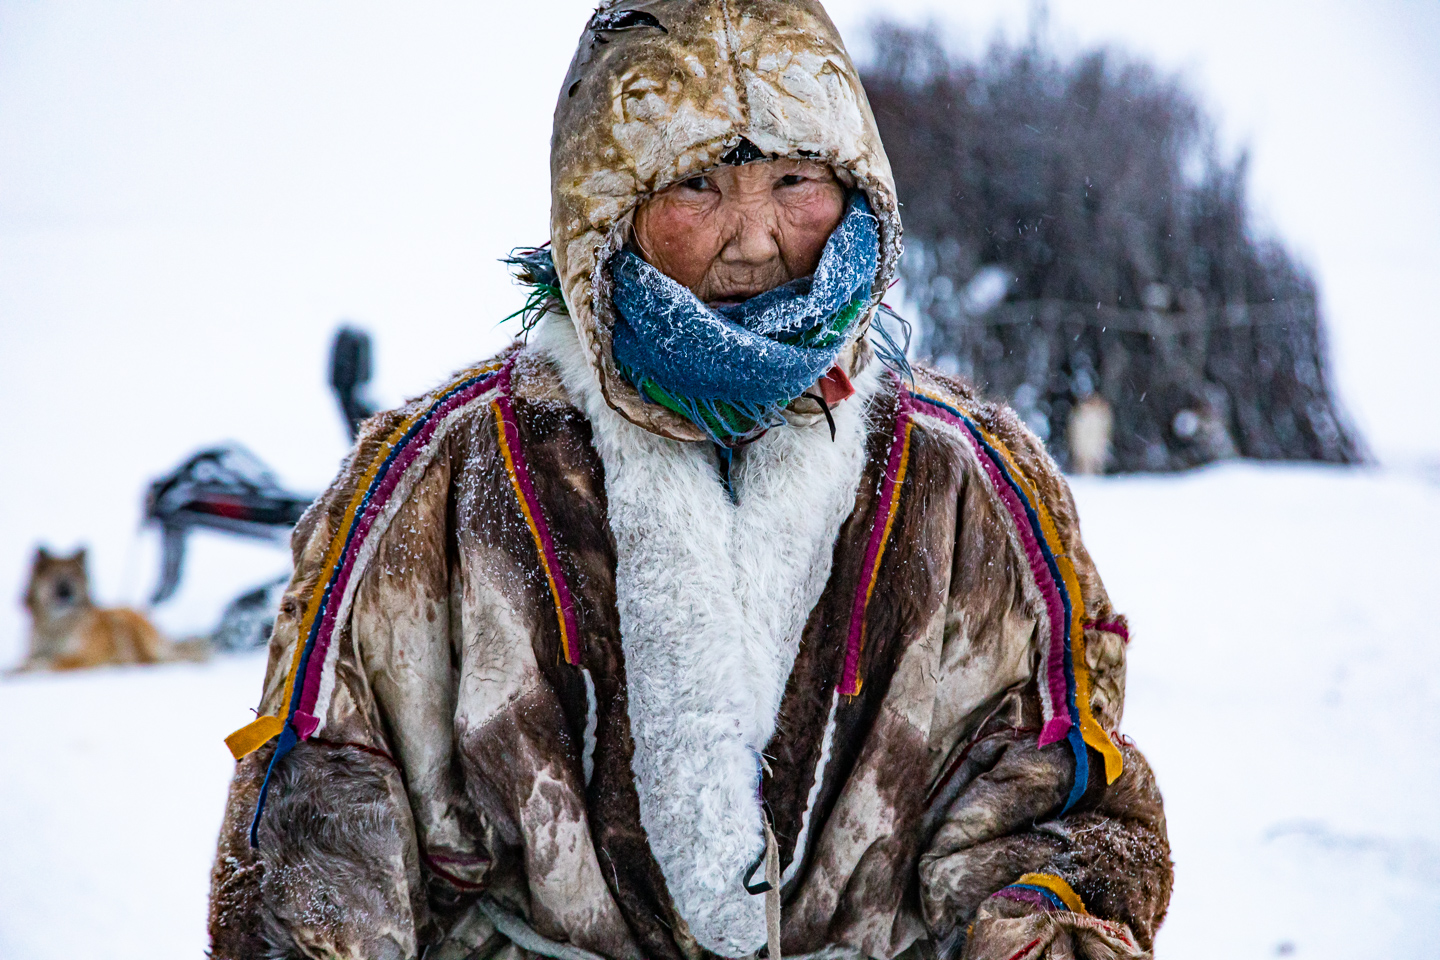 Indigenous people have inhabited the Arctic for thousands of years.